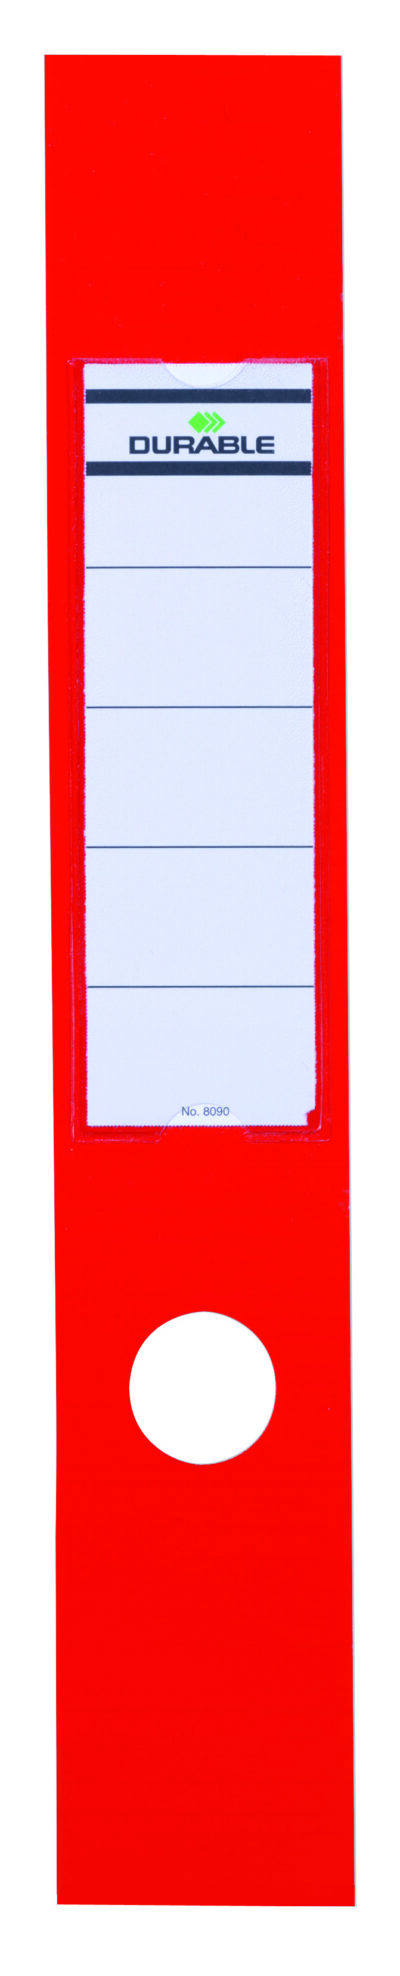 Durable Ordofix Lever Arch File Spine Label PVC 60x390mm Red (Pack 10) – 809003